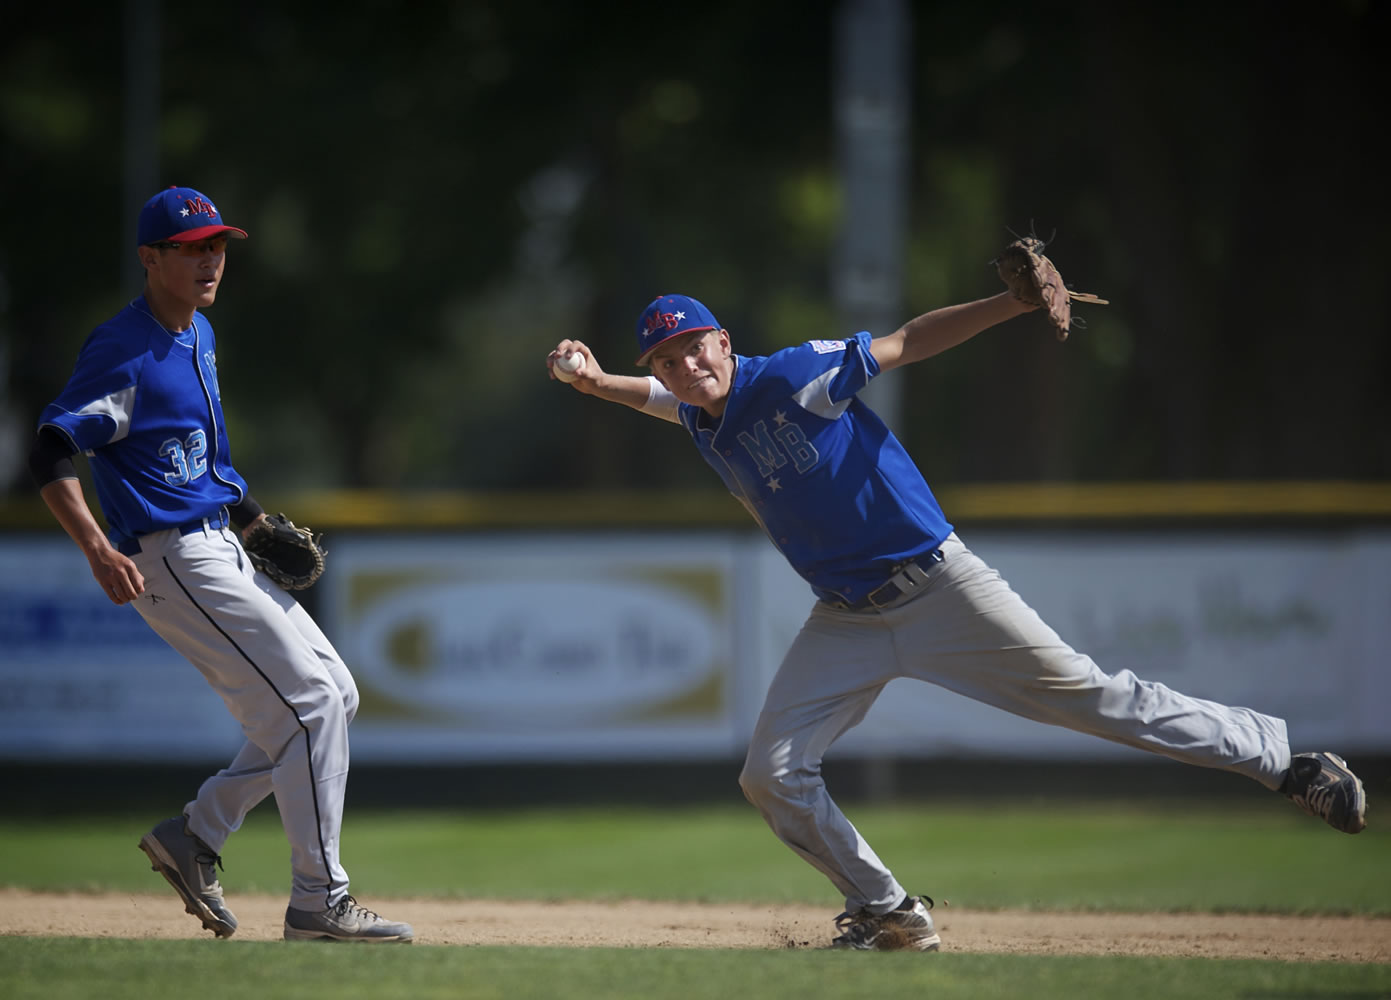 Southern California's Will Proctor attempts to make a play to first base against Naches, Wash., during the second inning of the semifinals of the Little League Junior Boys Western Regionals at Propstra Stadium on Tuesday.